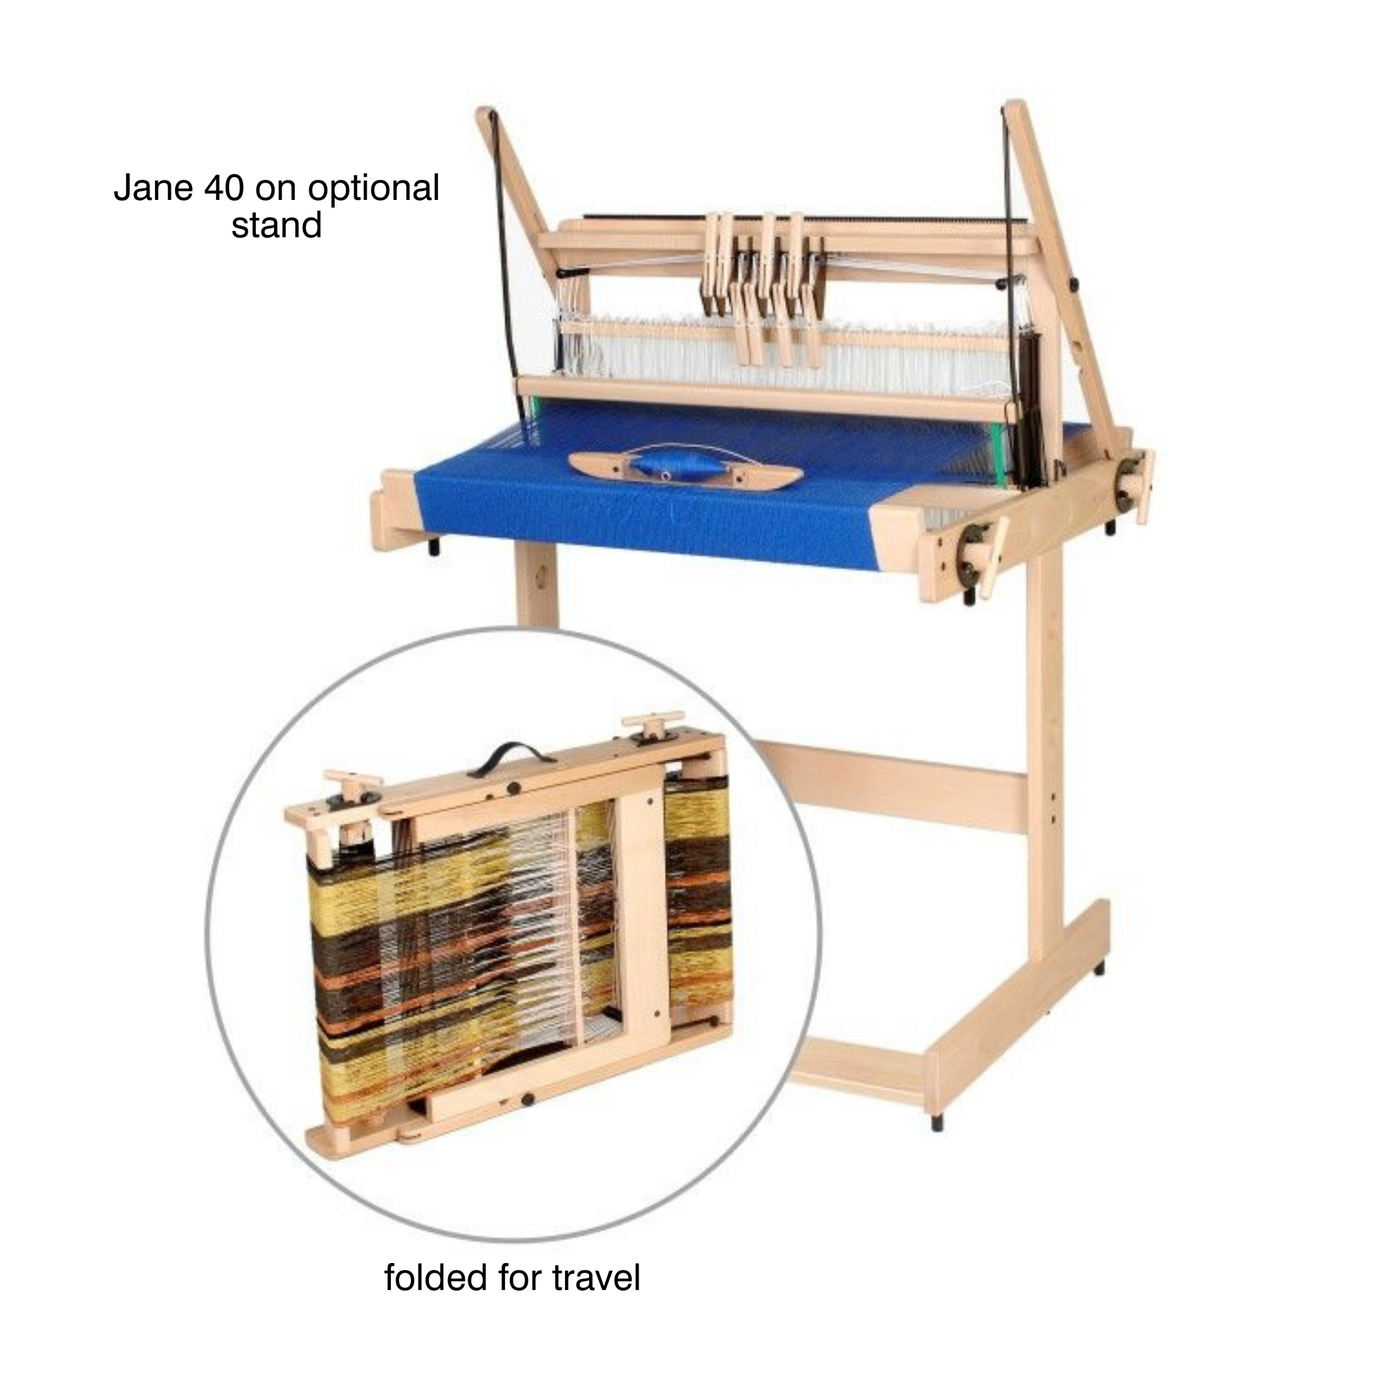 Louet Jane 40 Loom Folded for Travel also Show on Optional Stand